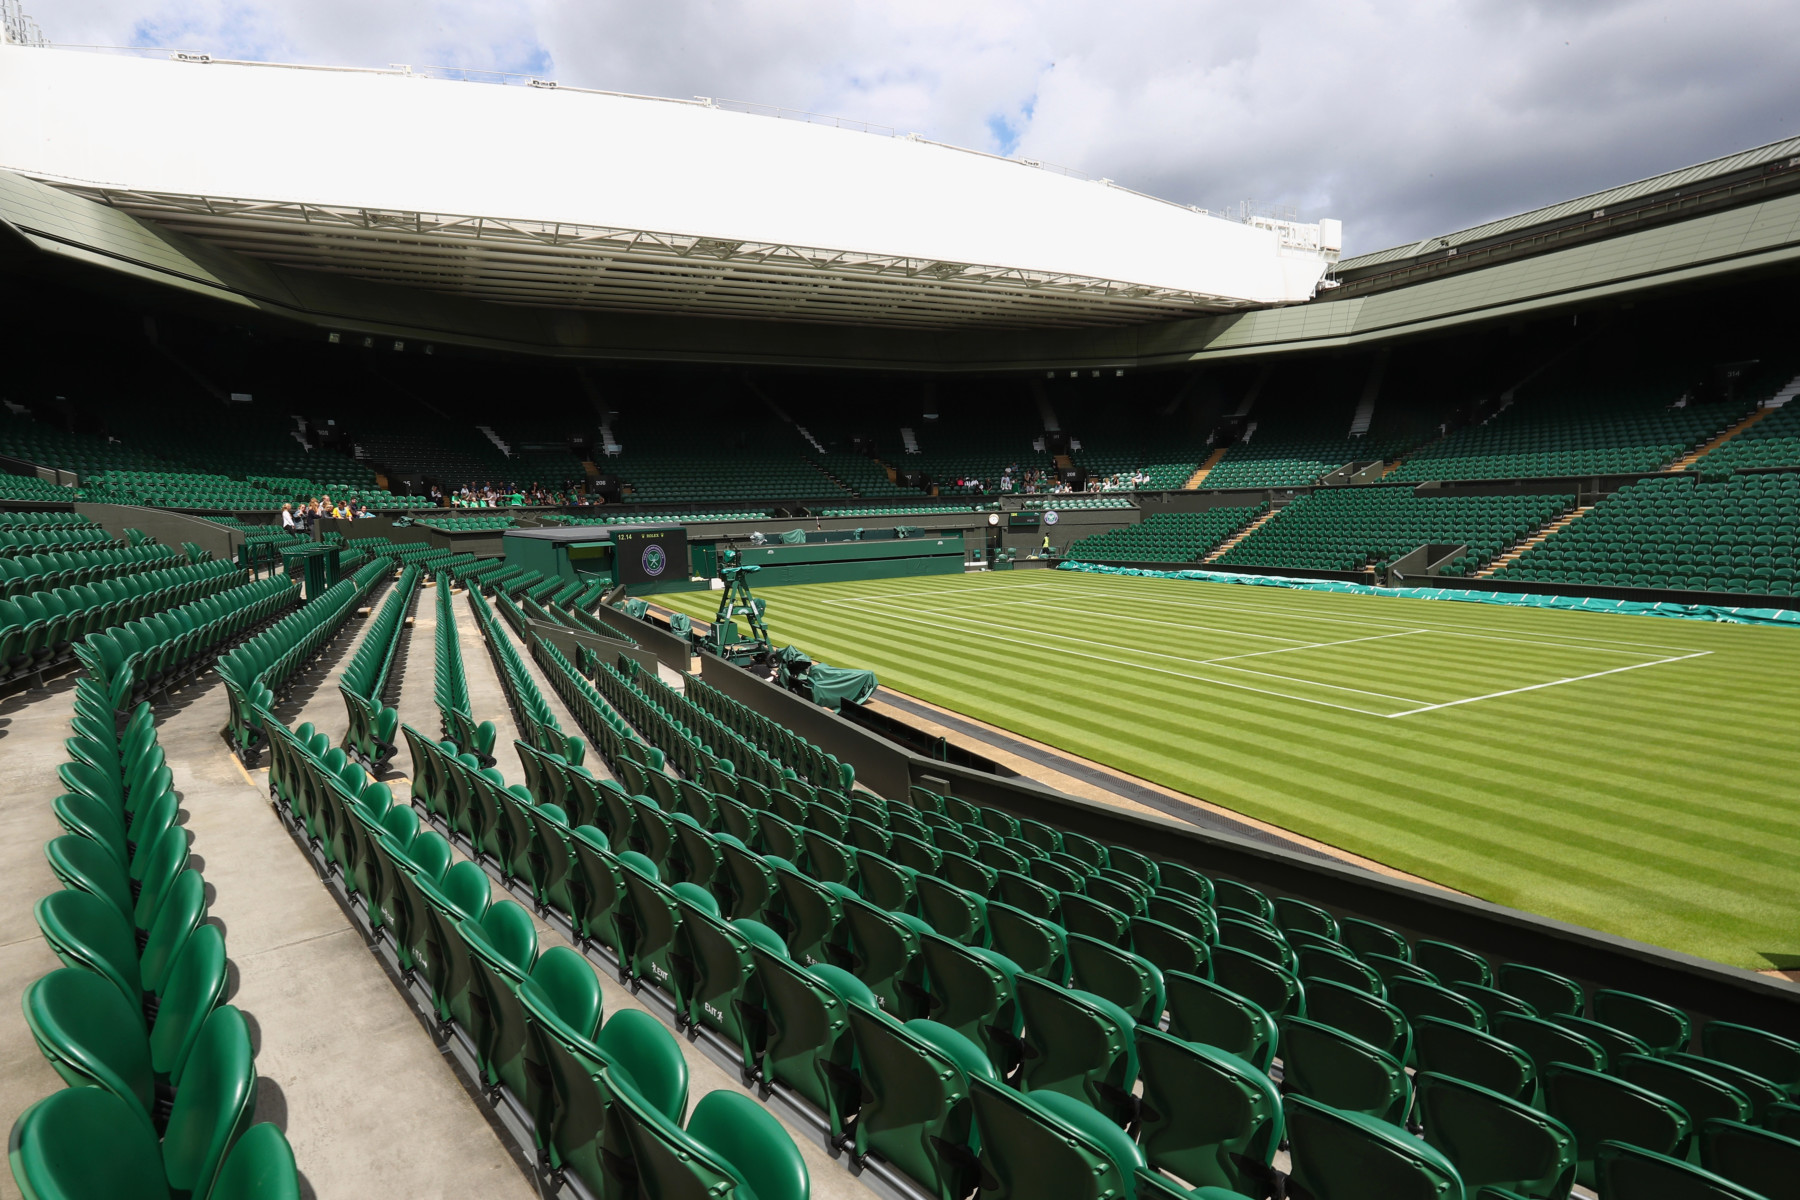 , Is Wimbledon 2020 going to be cancelled because of coronavirus outbreak?